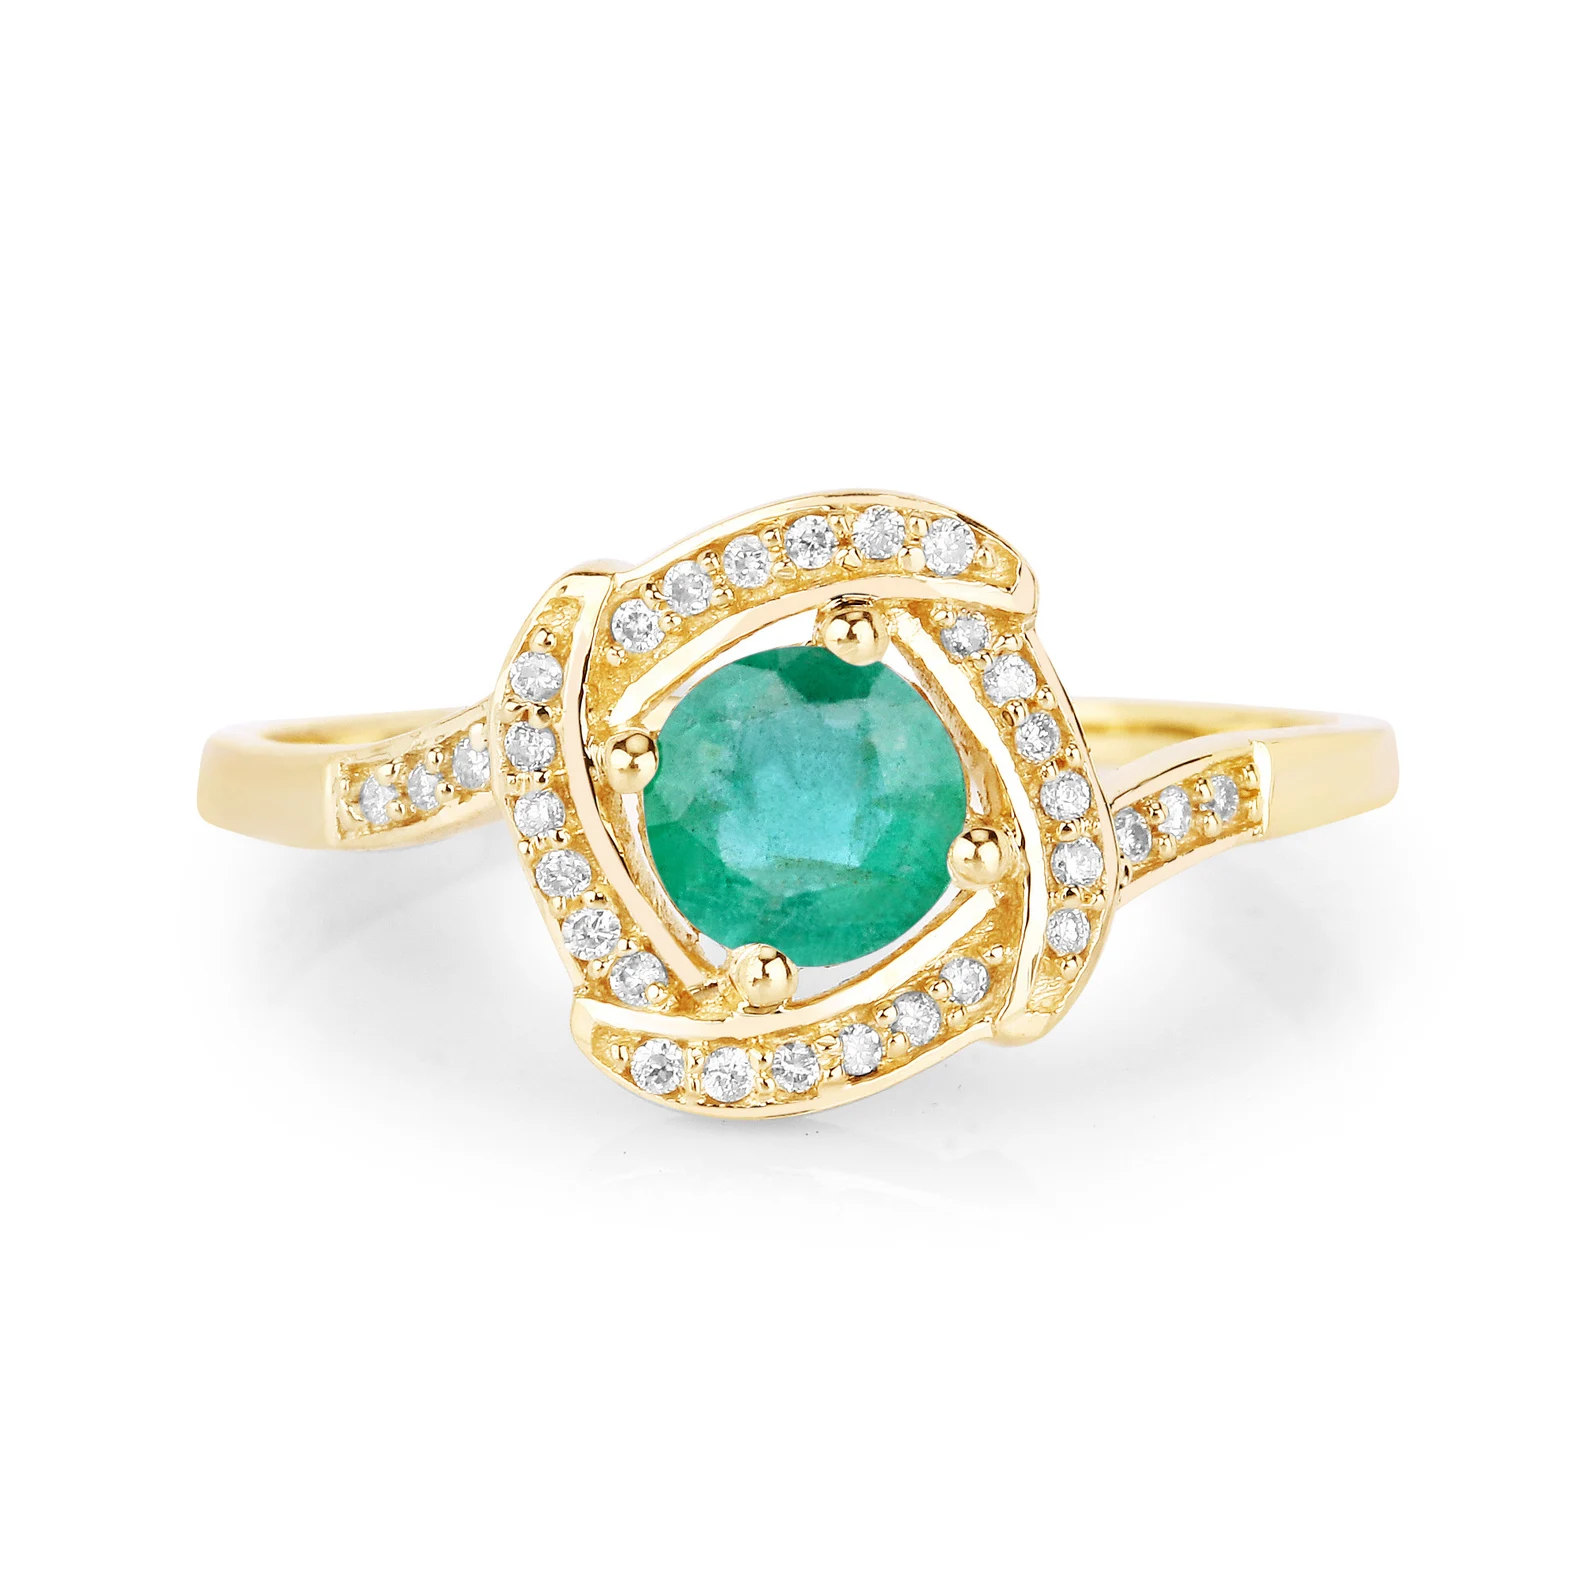 Engagement Ring in 14K Yellow Gold with Zambian Emerald 